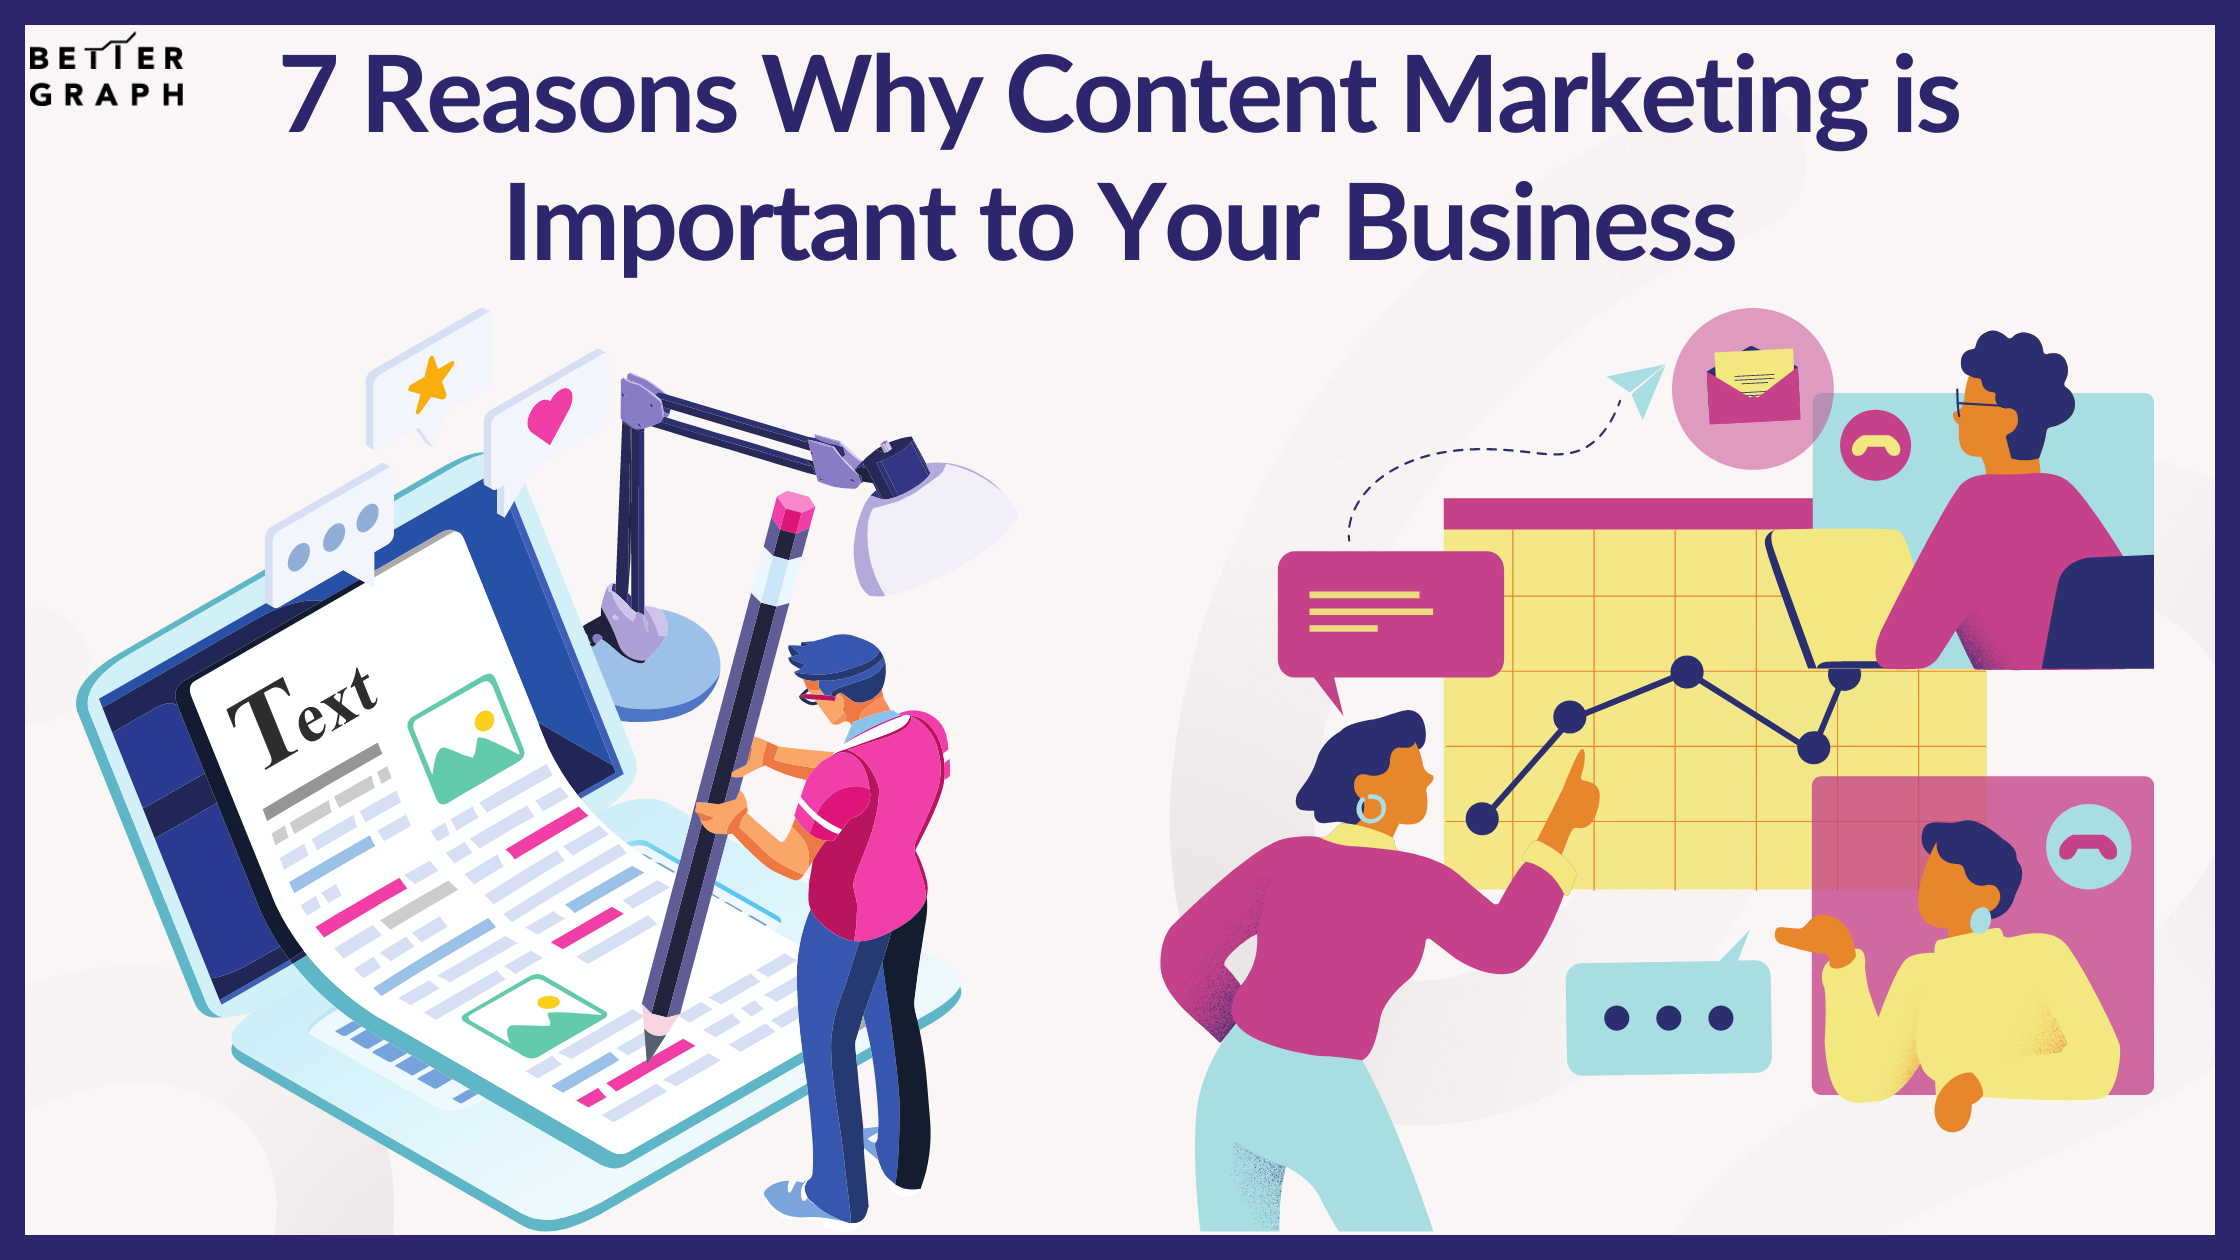 7 Reasons Why Content Marketing is Important to Your Business (1).png  by BetterGraph